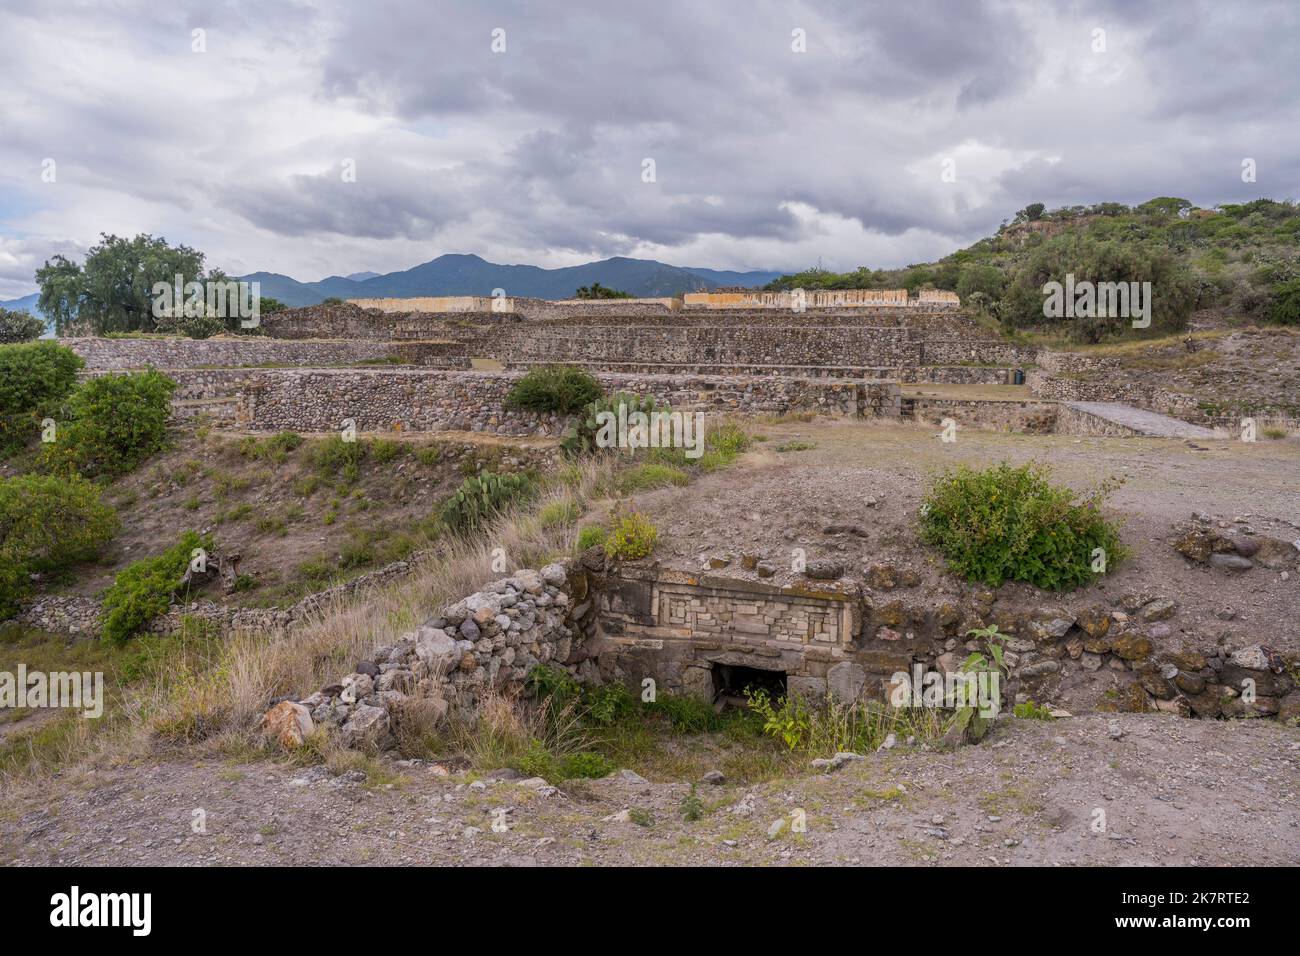 The archaeological site of Yagul (known as Pueblo Viejo locally) was once inhabited by the Pre-Columbian civilization of the Zapotecs, in the Valley o Stock Photo